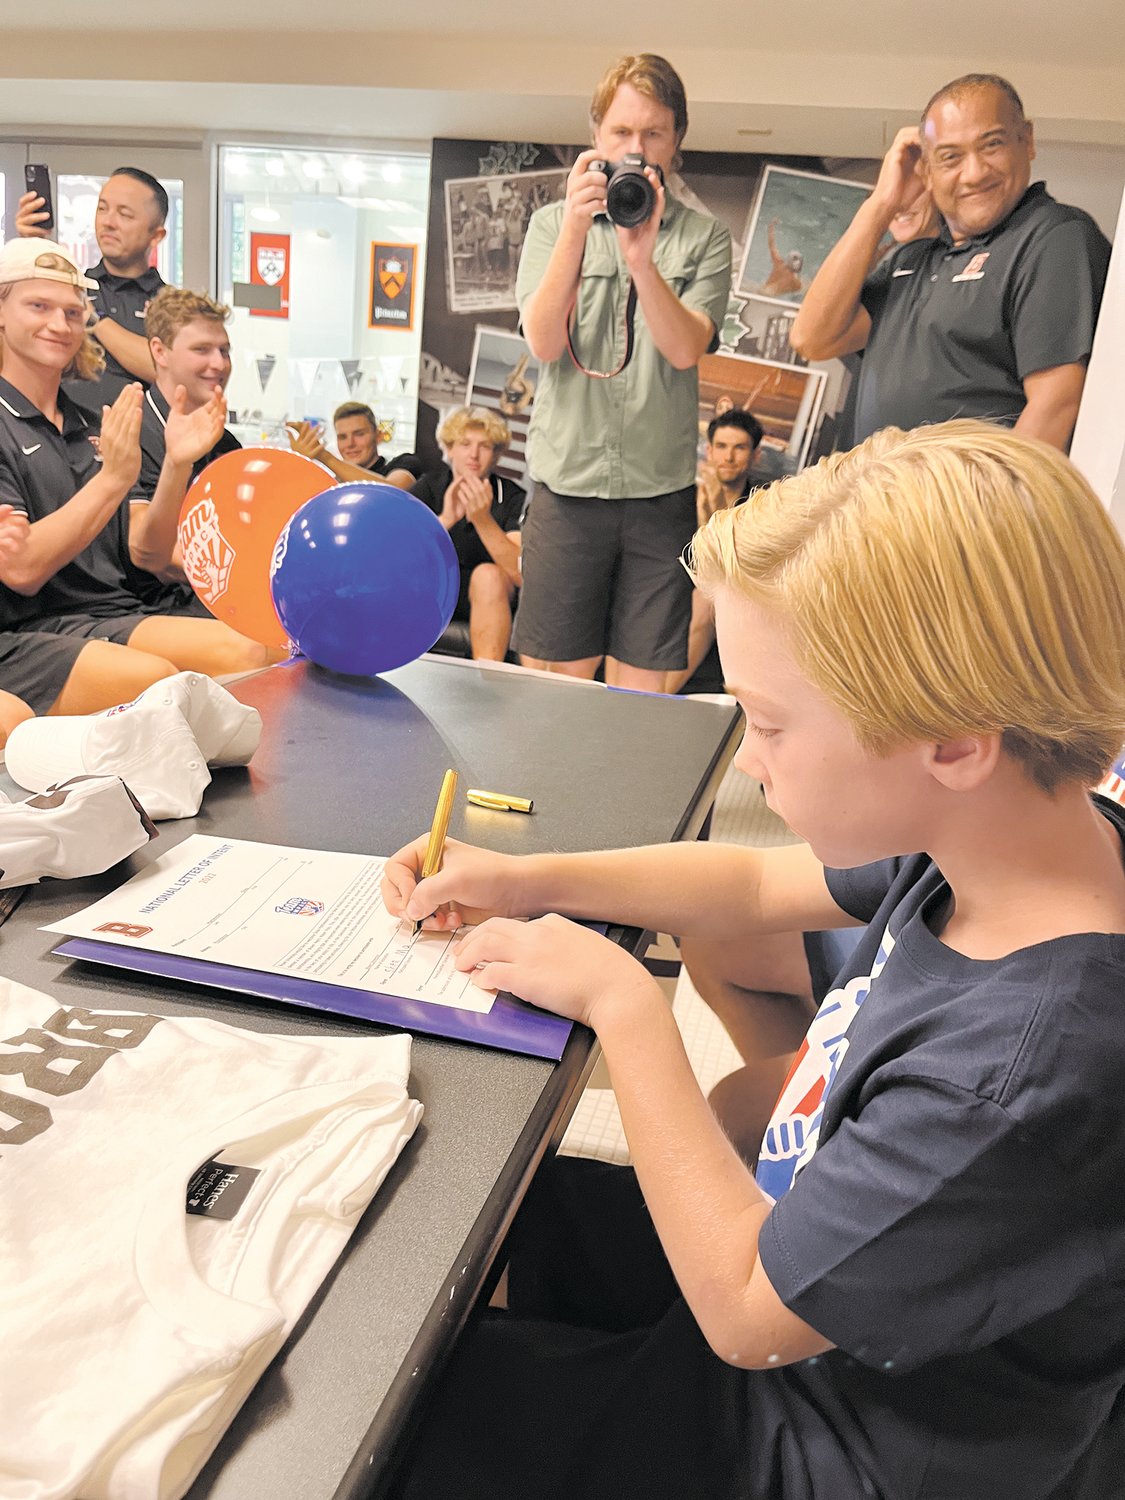 IT’S OFFICIAL: Shea Mathewson signed on as a member of the Men’s Water Polo team through Team IMPACT on Sept. 10. Men and women from Brown University’s Water Polo team cheered him on at the event.